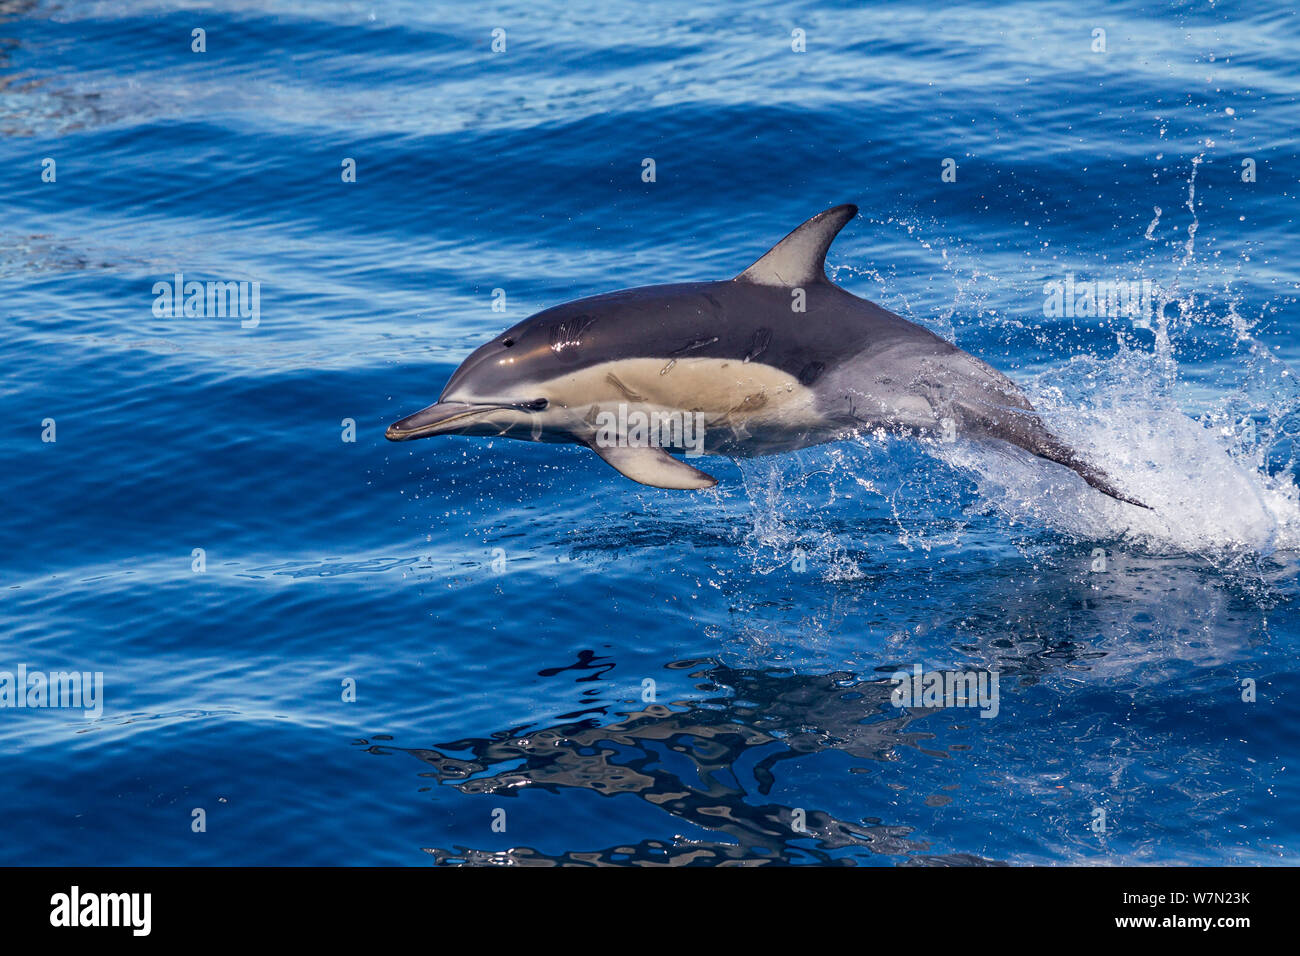 Short-beaked common dolphin (Delphinus delphis) breaking the surface and leaping from the water. Off Napier, Hawkes Bay, New Zealand. Stock Photo